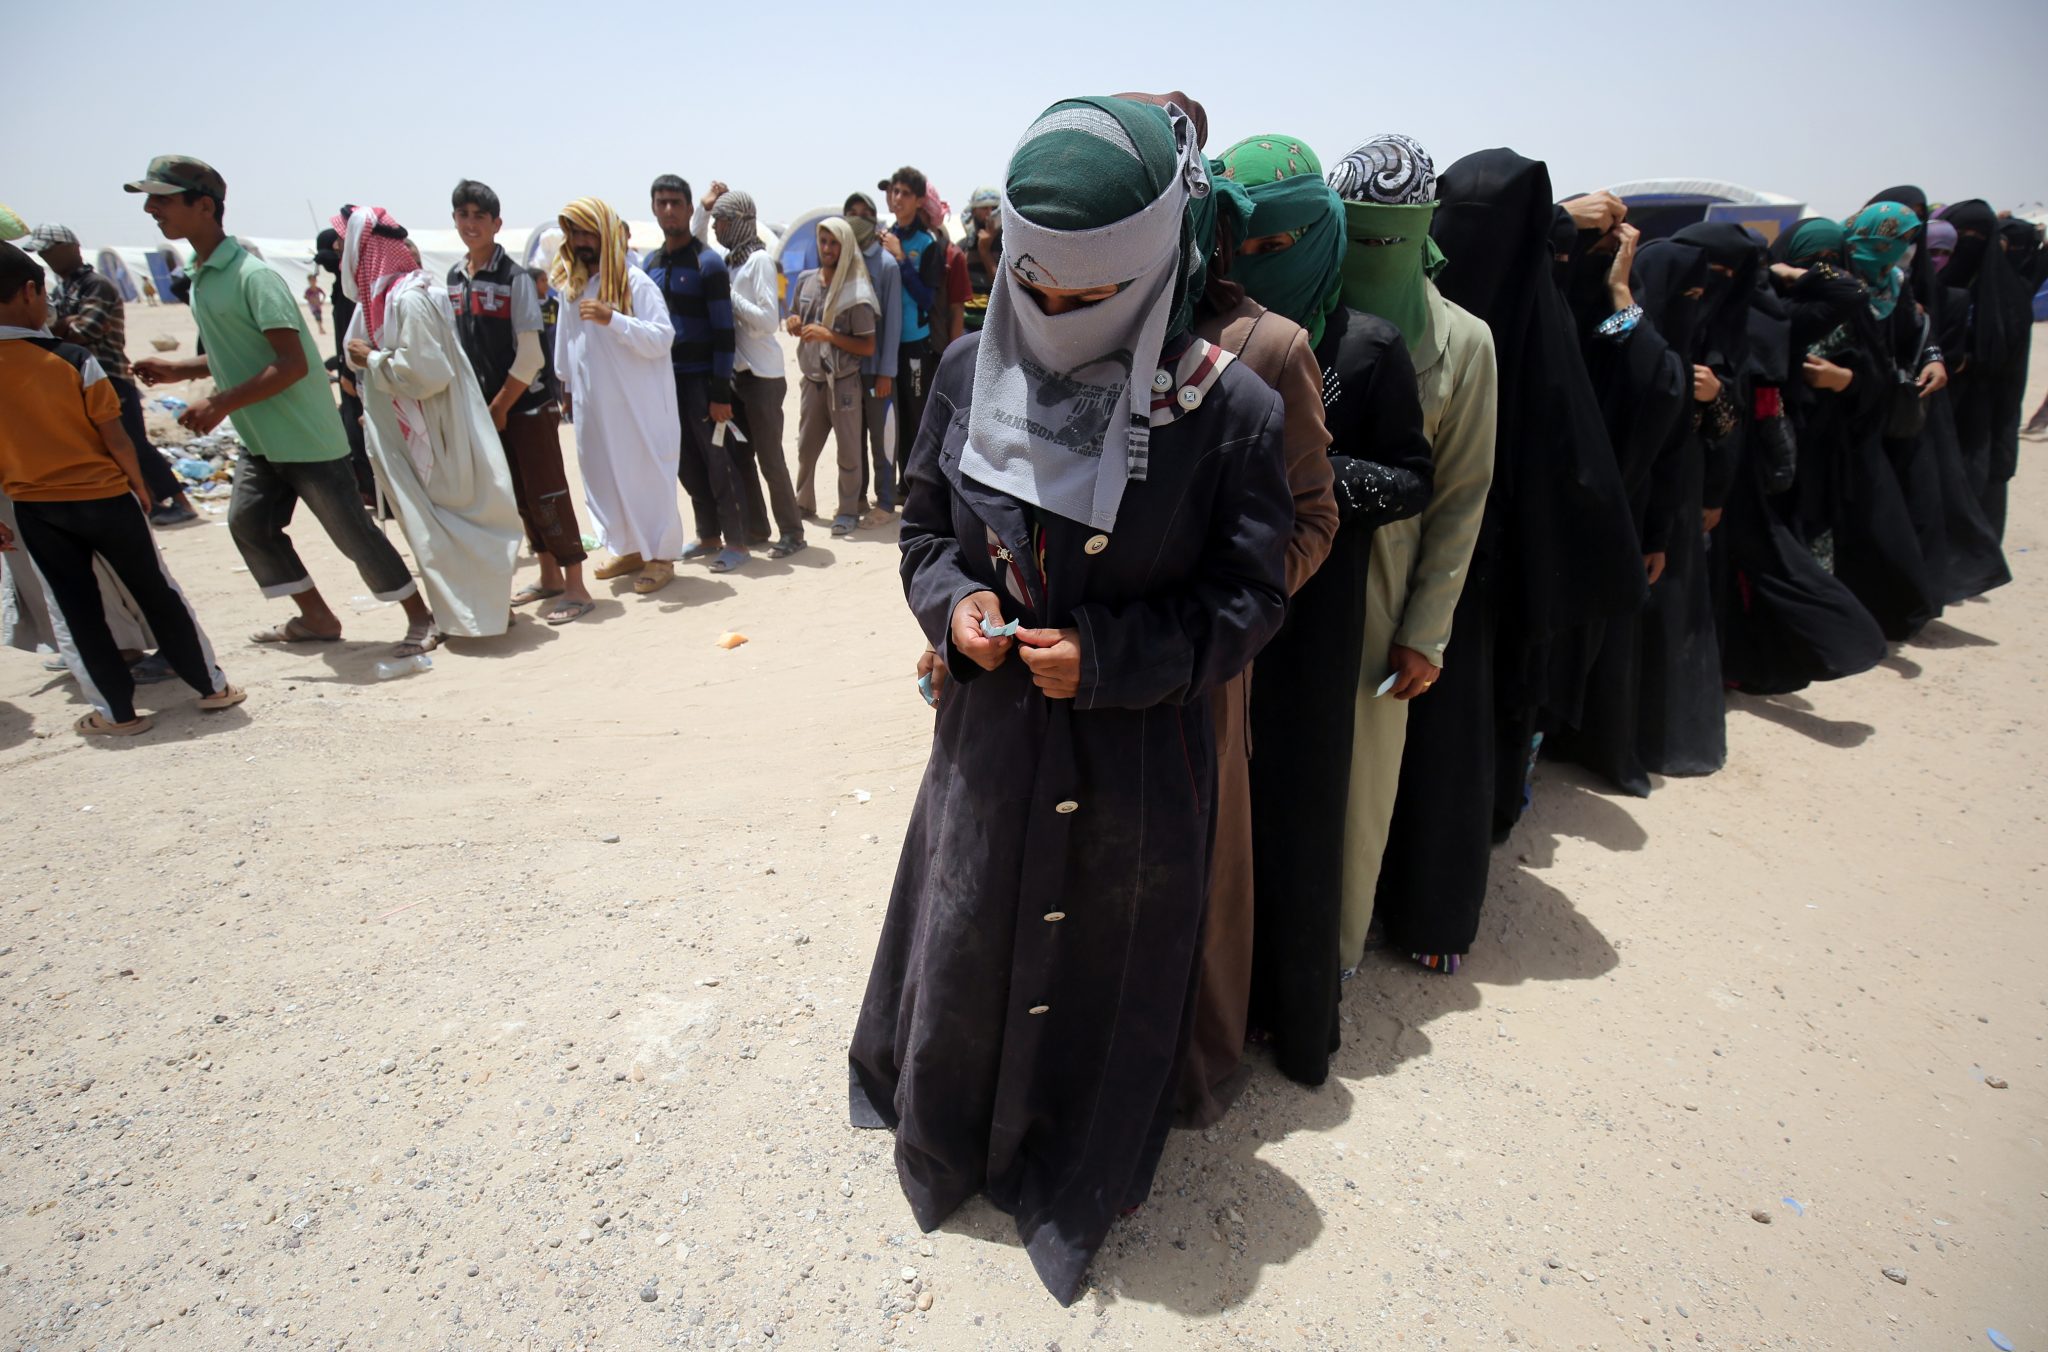 Iraqis displaced from the city of Fallujah queue up to collect aid distributed by the Norwegian Refugee Council at a newly opened camp where they are taking shelter in Amriyat al-Fallujah on June 27, 2016, south of Fallujah. Iraqi forces on June 26 wrapped up operations in Fallujah and declared the area free of jihadists from the Islamic State (IS) group after a month-long operation. The government said the destruction caused by the fighting was limited and vowed to do its utmost to allow the tens of thousands of displaced civilians to return to their homes.  / AFP PHOTO / AHMAD AL-RUBAYE